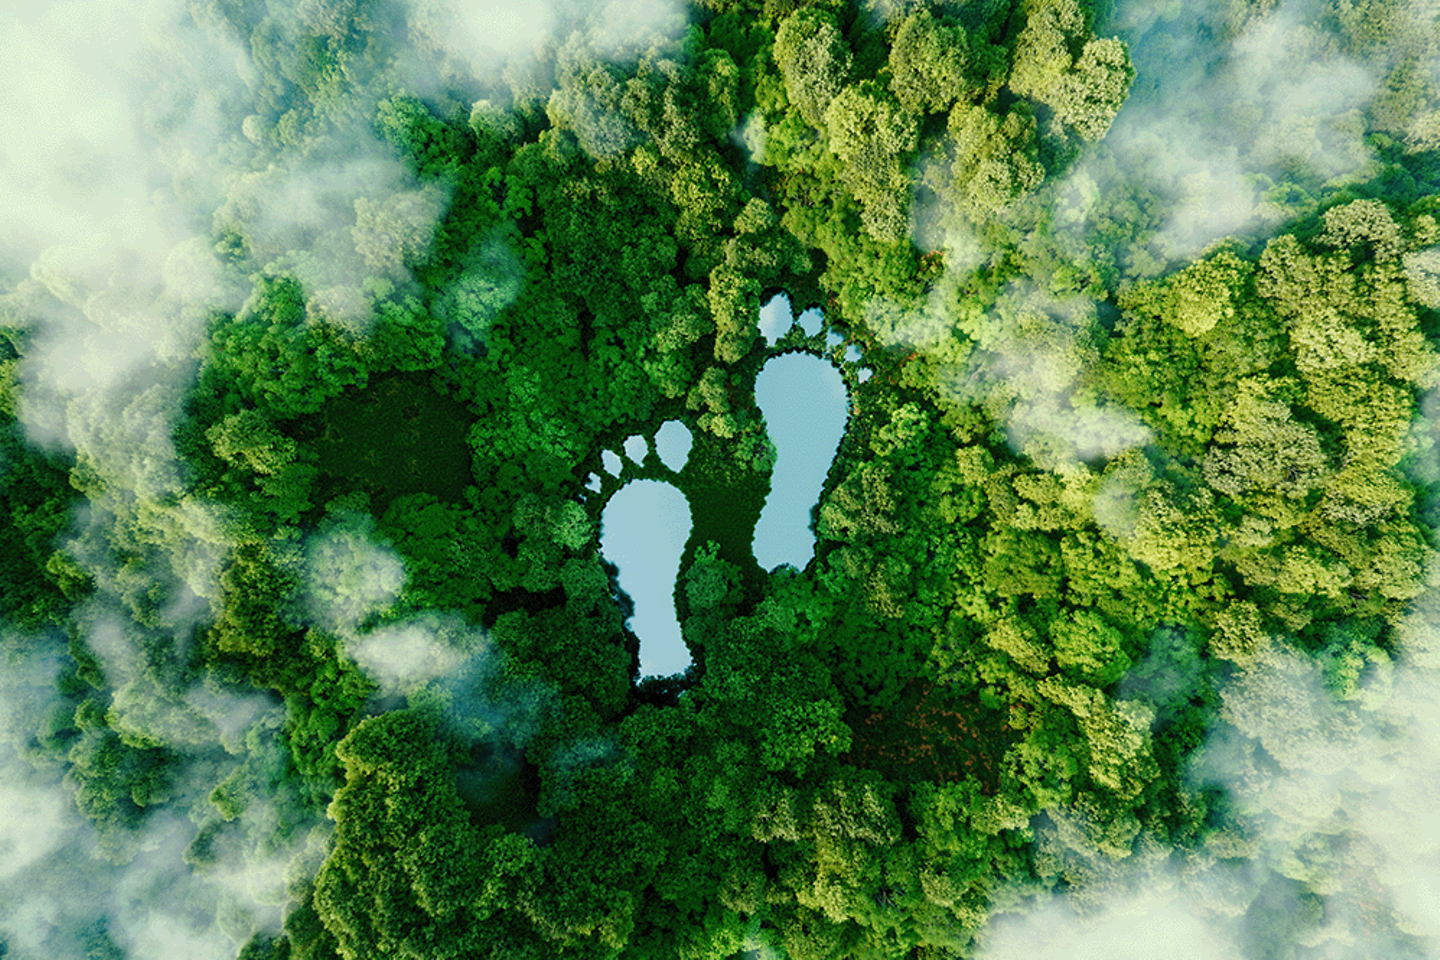 Gigantic water filled footprints in a dense forest, picture taken from above